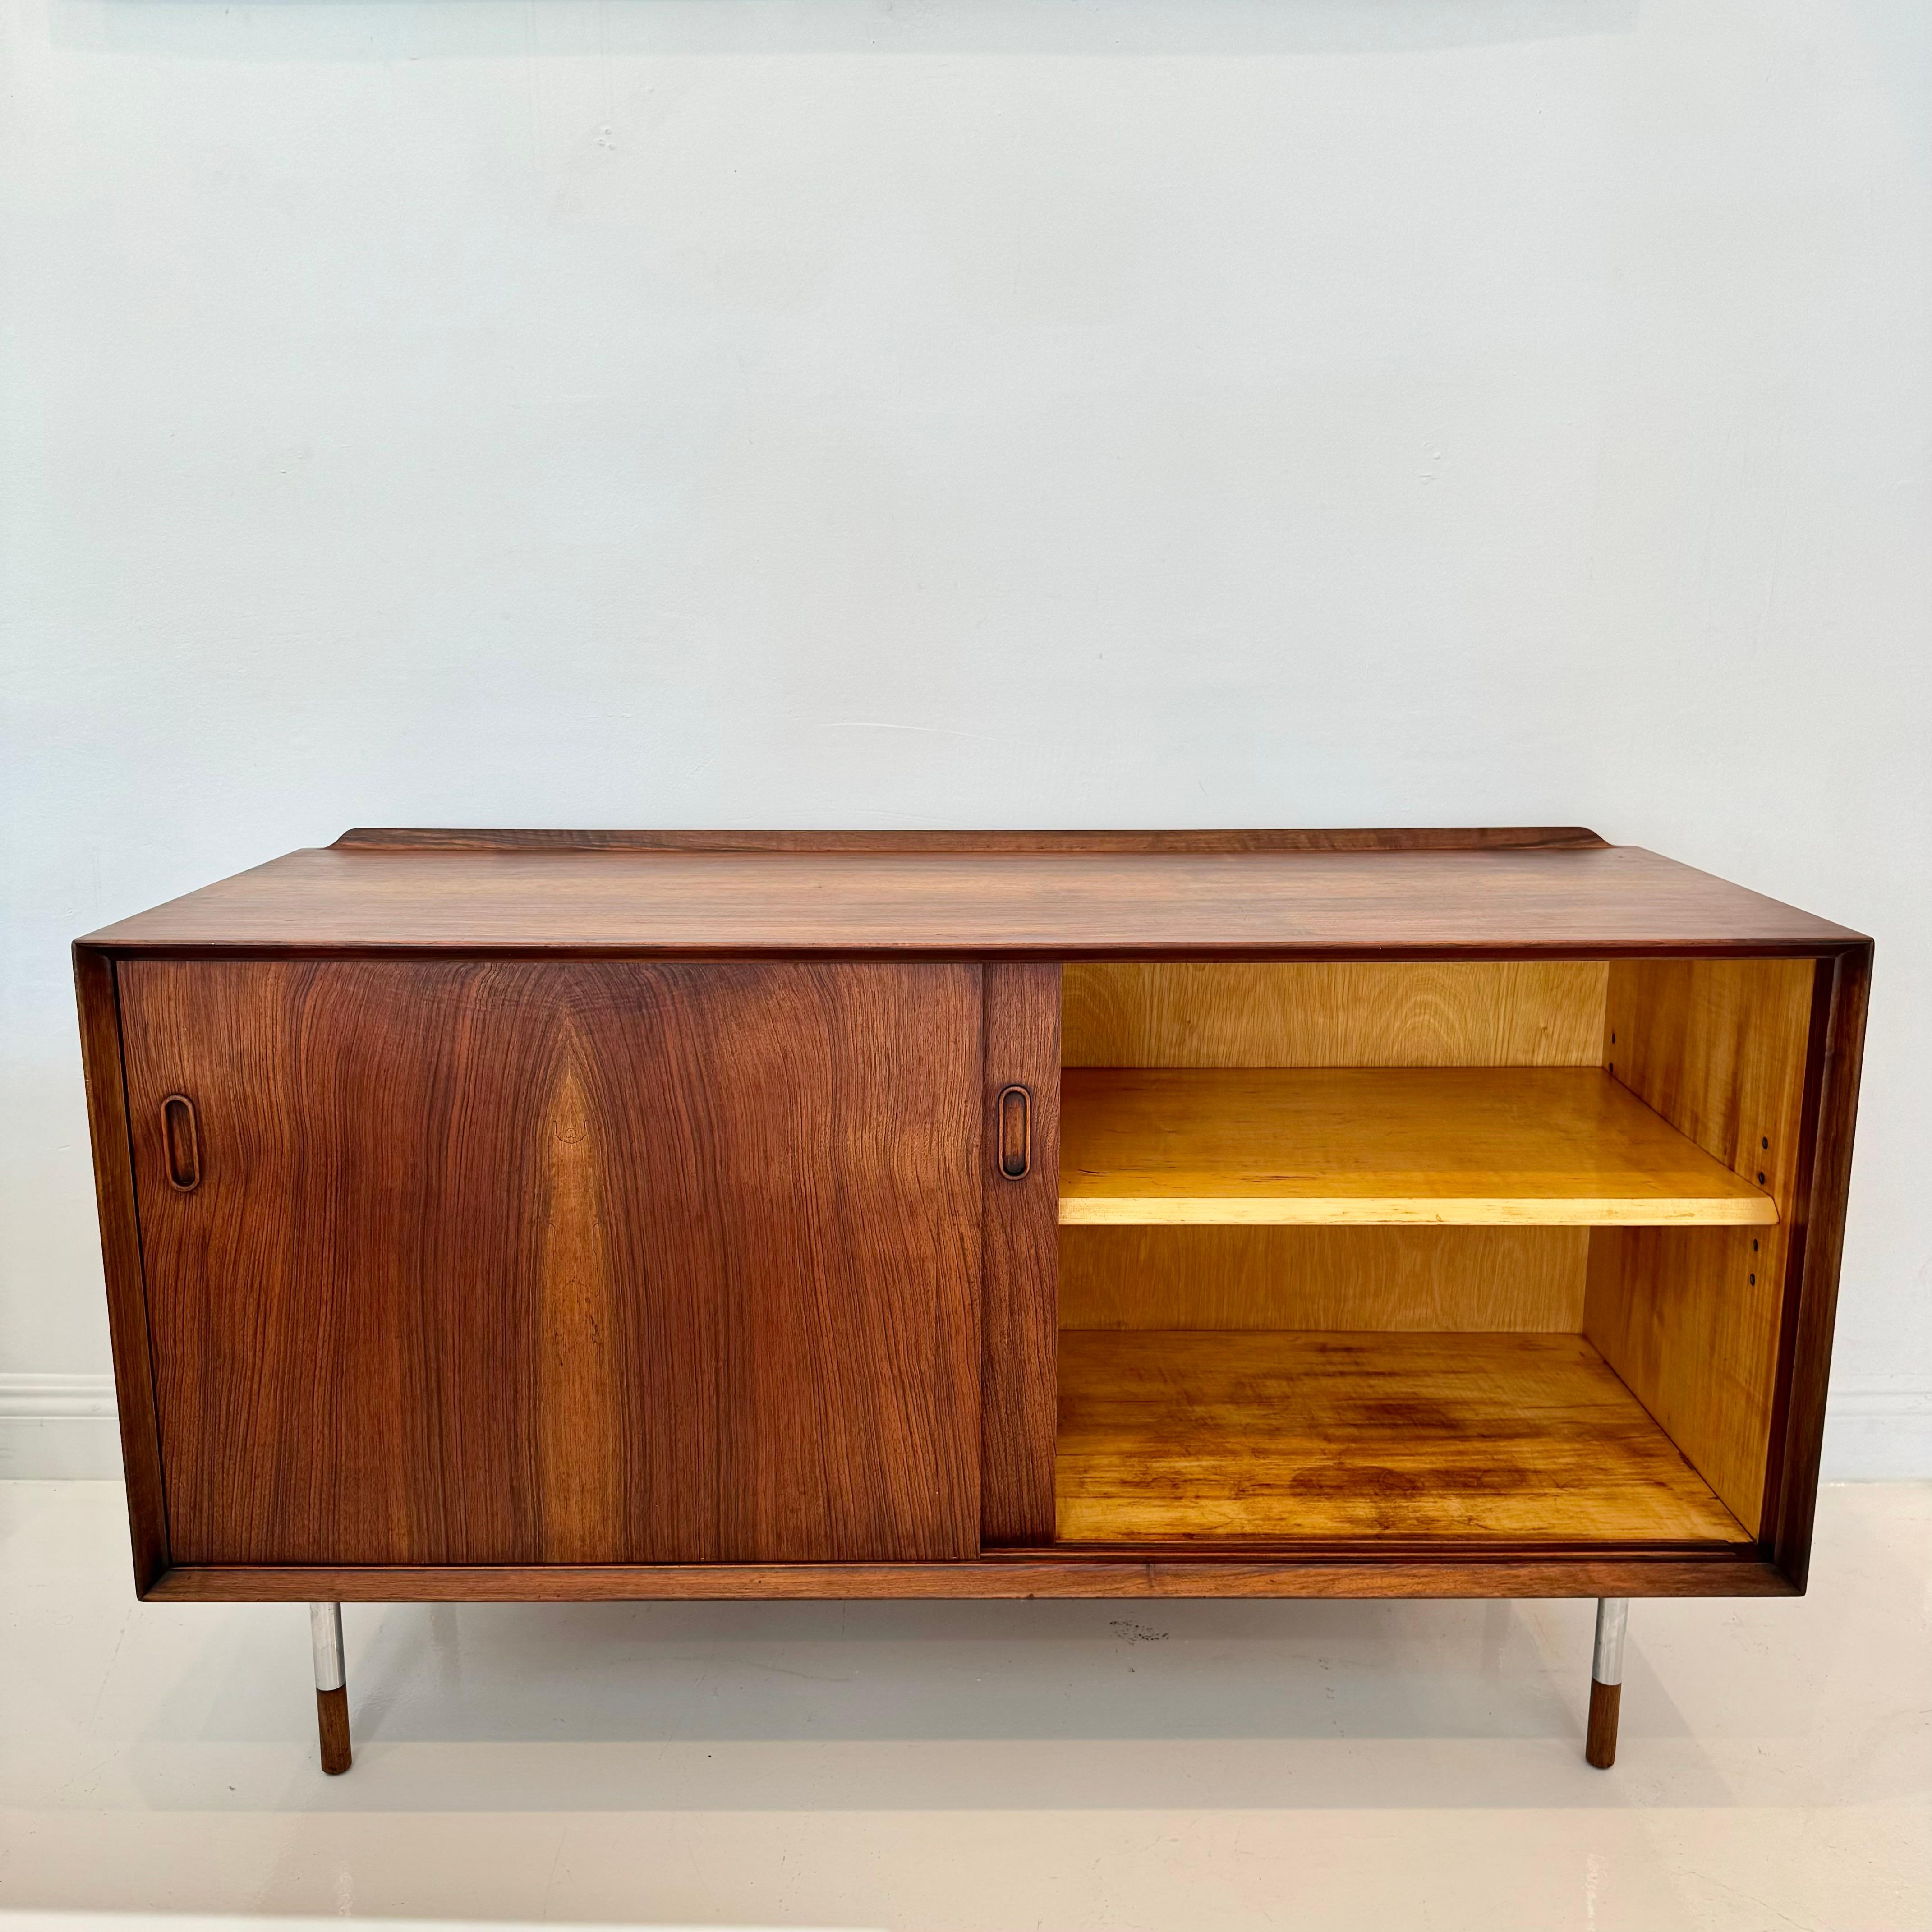 Stunning Rosewood sideboard by Arne Vodder for George Tanier. Made in Denmark in the 1960s, this piece has exceptional presence and is in a size that is perfectly versatile. The exterior is made up of solid Rosewood boards with an Ash wood interior